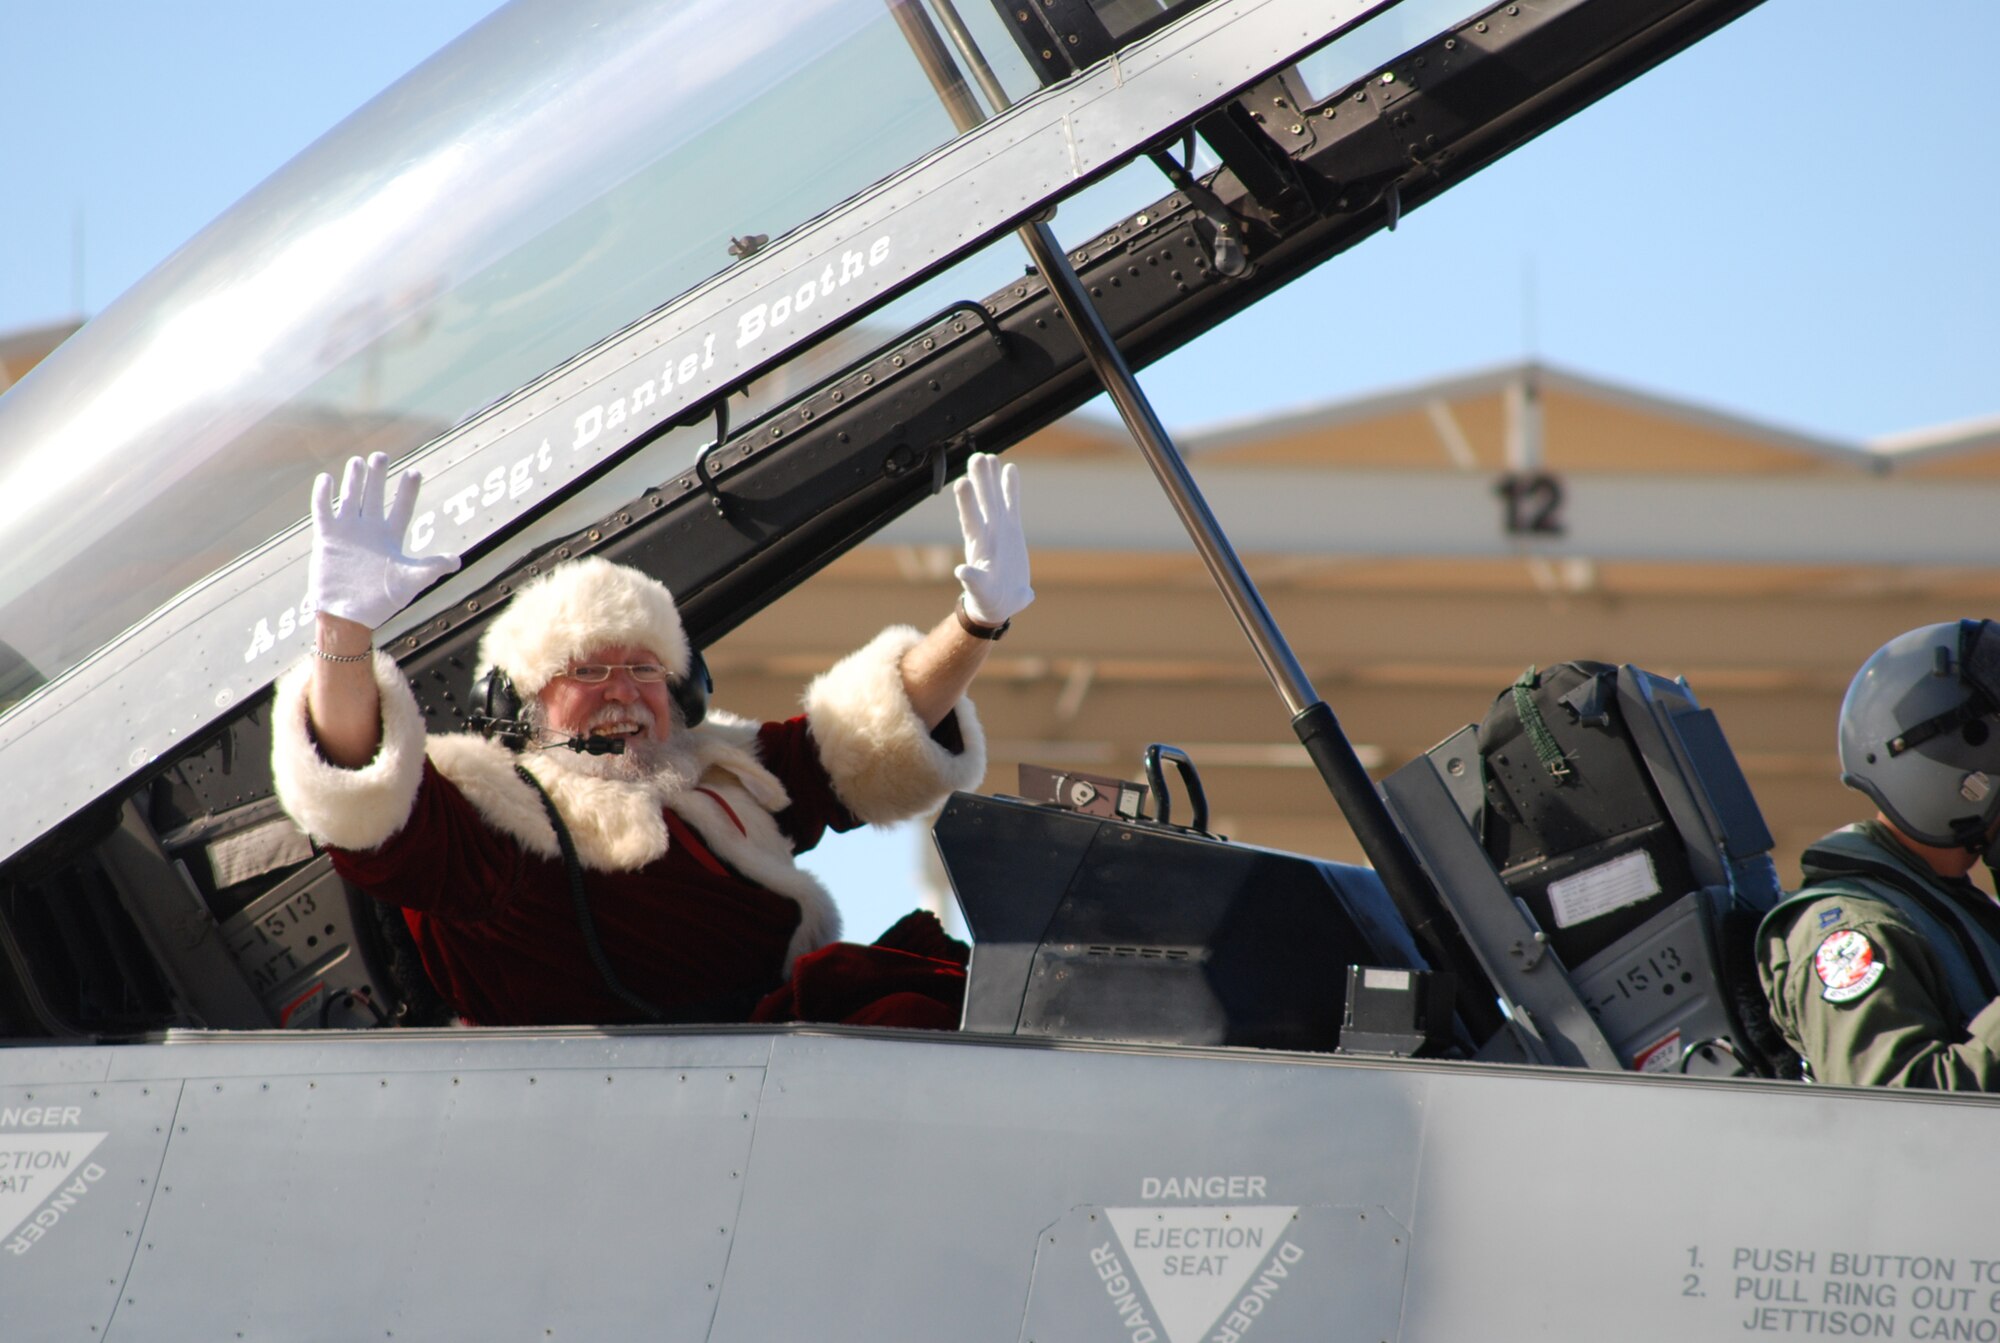 Santa arrived in the backseat of a 457th Fighter Squadron hometown-built F-16 recently. Jolly old Saint Nick, known the rest of the year as Dr. Don Shelton, member of the Fort Worth Air Power Council, visited children and 301st Fighter Wing families by handing out presents during the December Unit Training Assembly. This marks the third year Santa has arrived in high-tech Fighting Falcon style to the Naval Air Station Joint Reserve Base Fort Worth, Texas. (U.S. Air Force Photo/Staff Sgt. Kristin Mack)